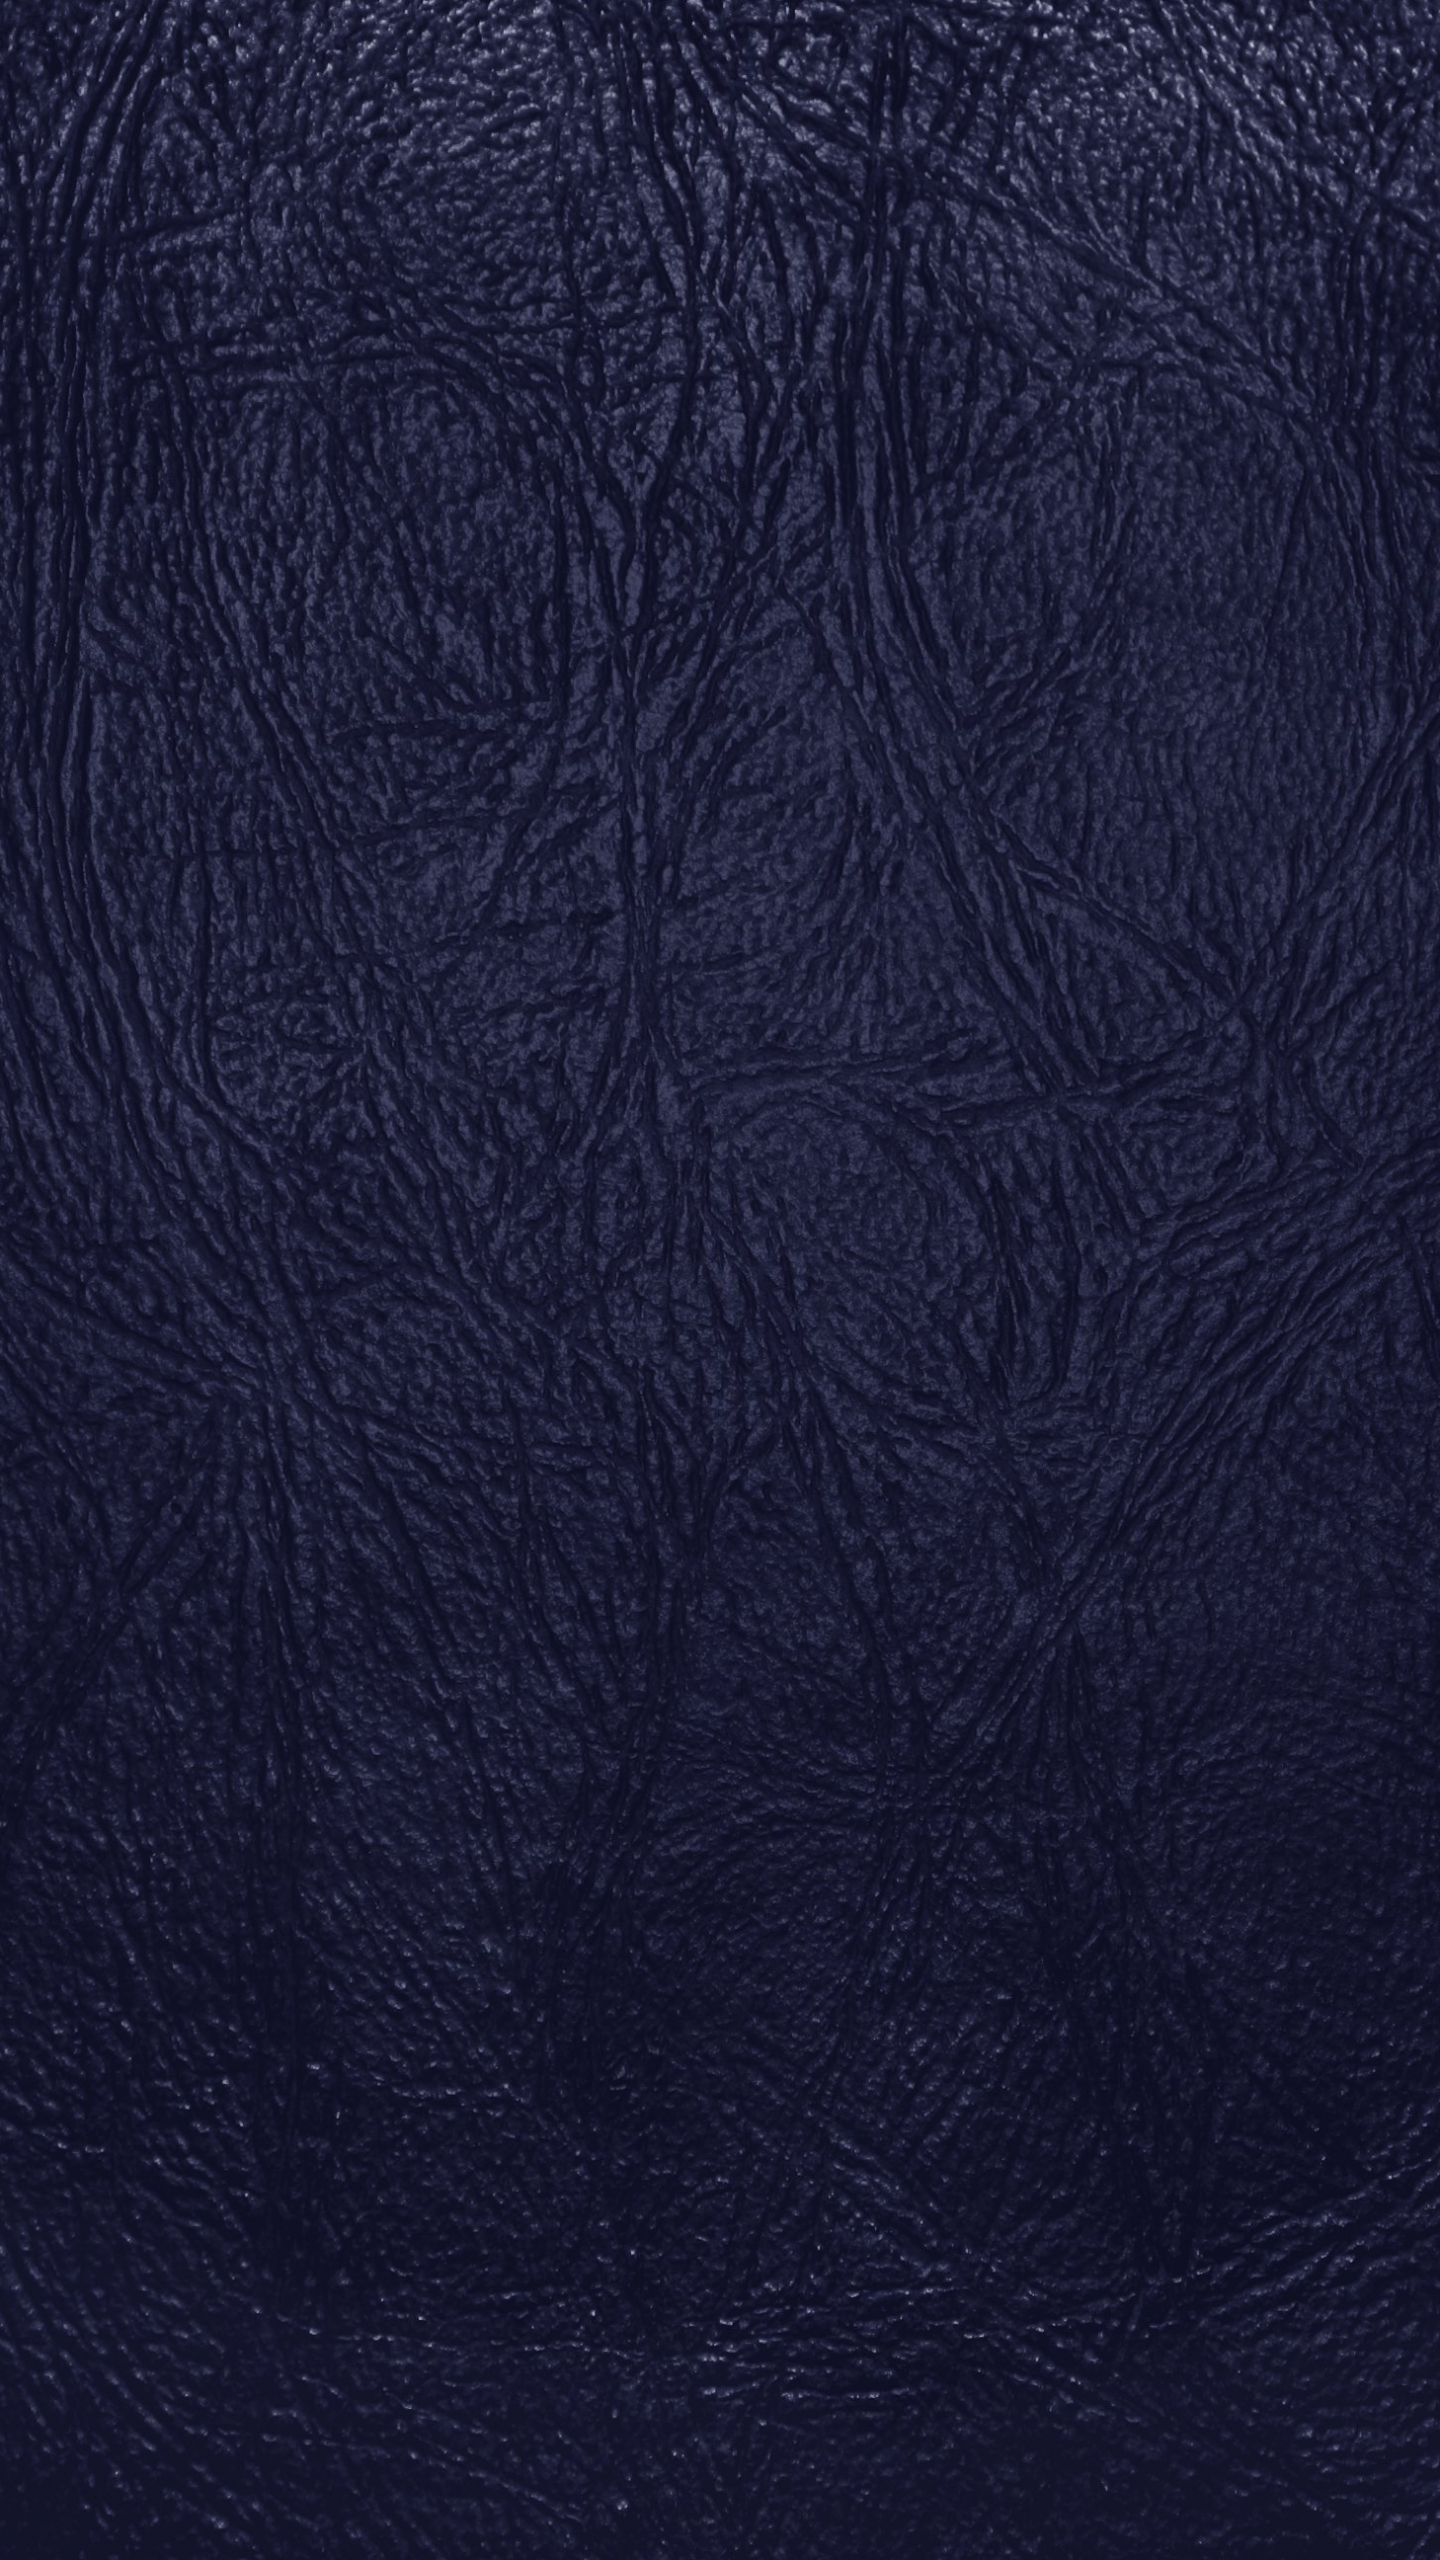 Free download Navy Blue Leather Close Up Texture Picture Photograph Photo [3888x2592] for your Desktop, Mobile & Tablet. Explore Textured Wallpaper Designs. Black and White Textured Wallpaper, Textured White